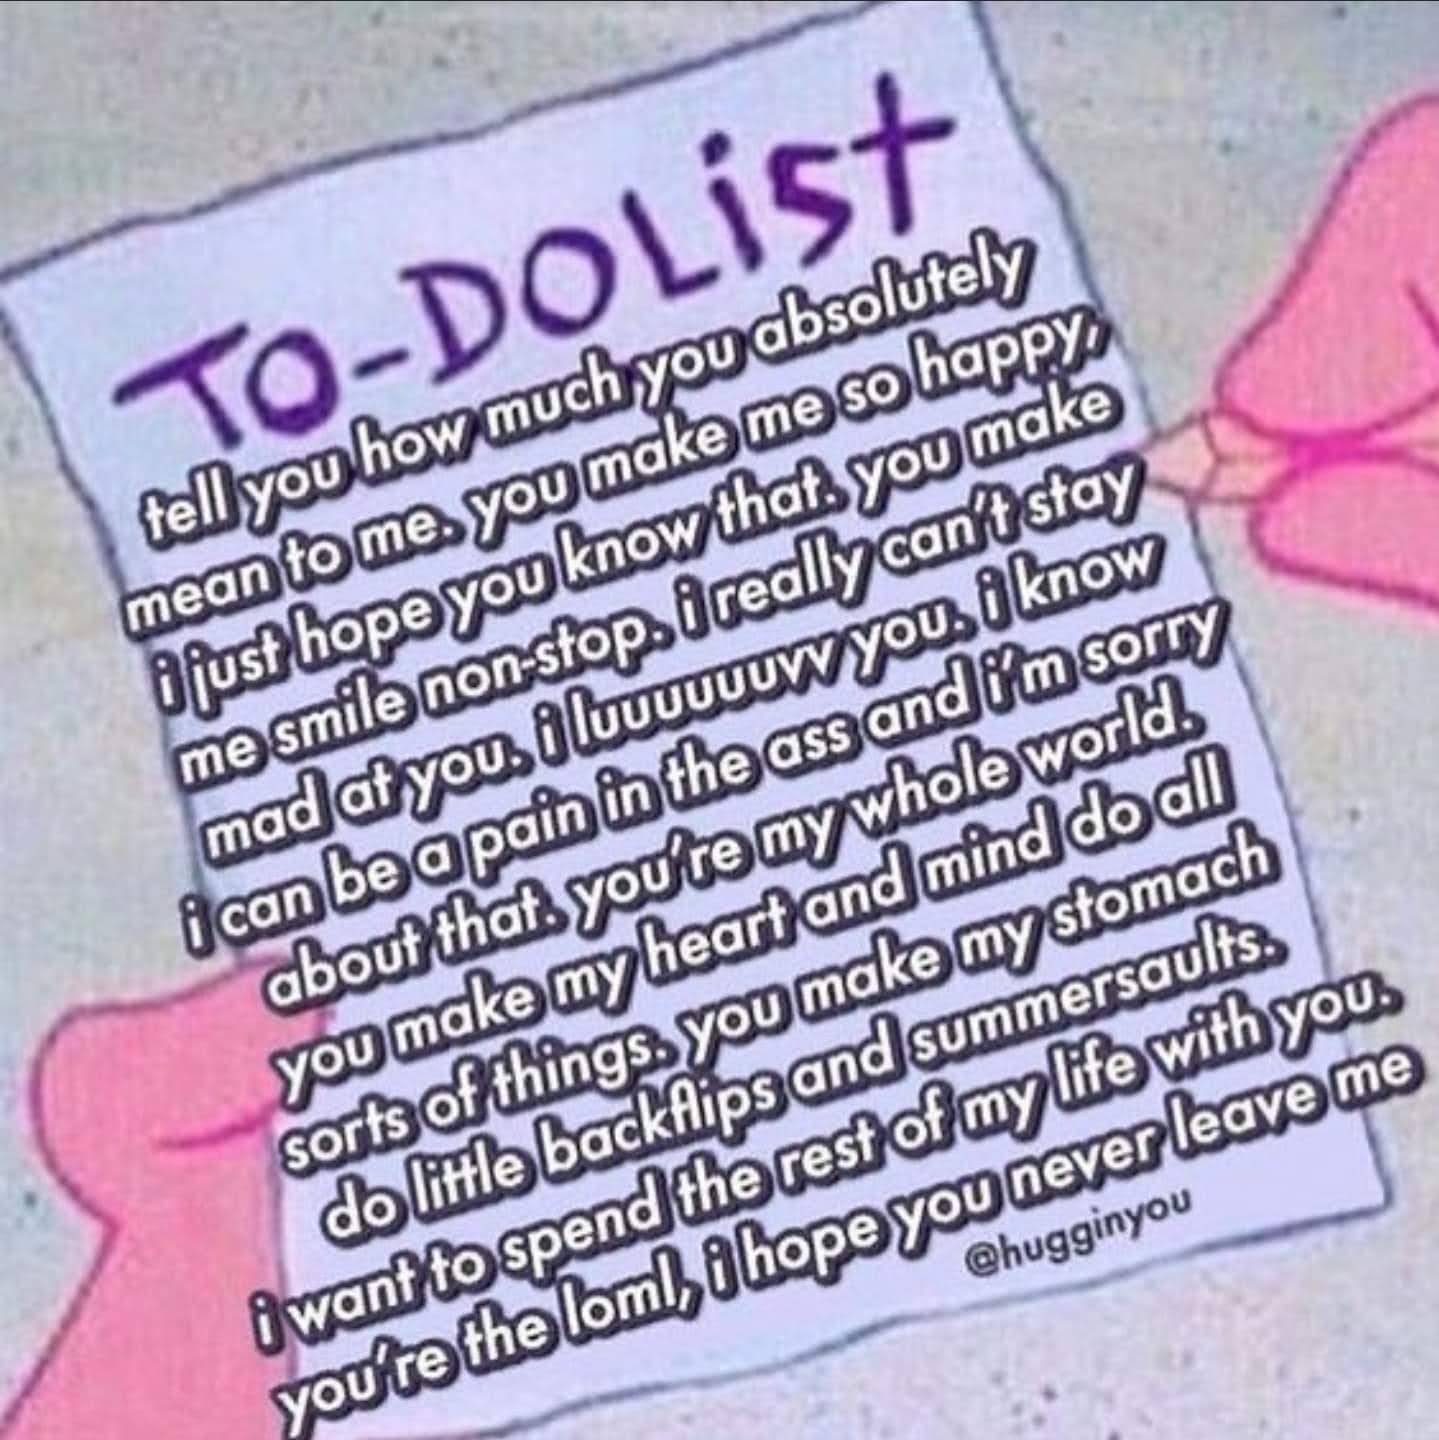 To-do list: tell you how much you absolutely mean to me